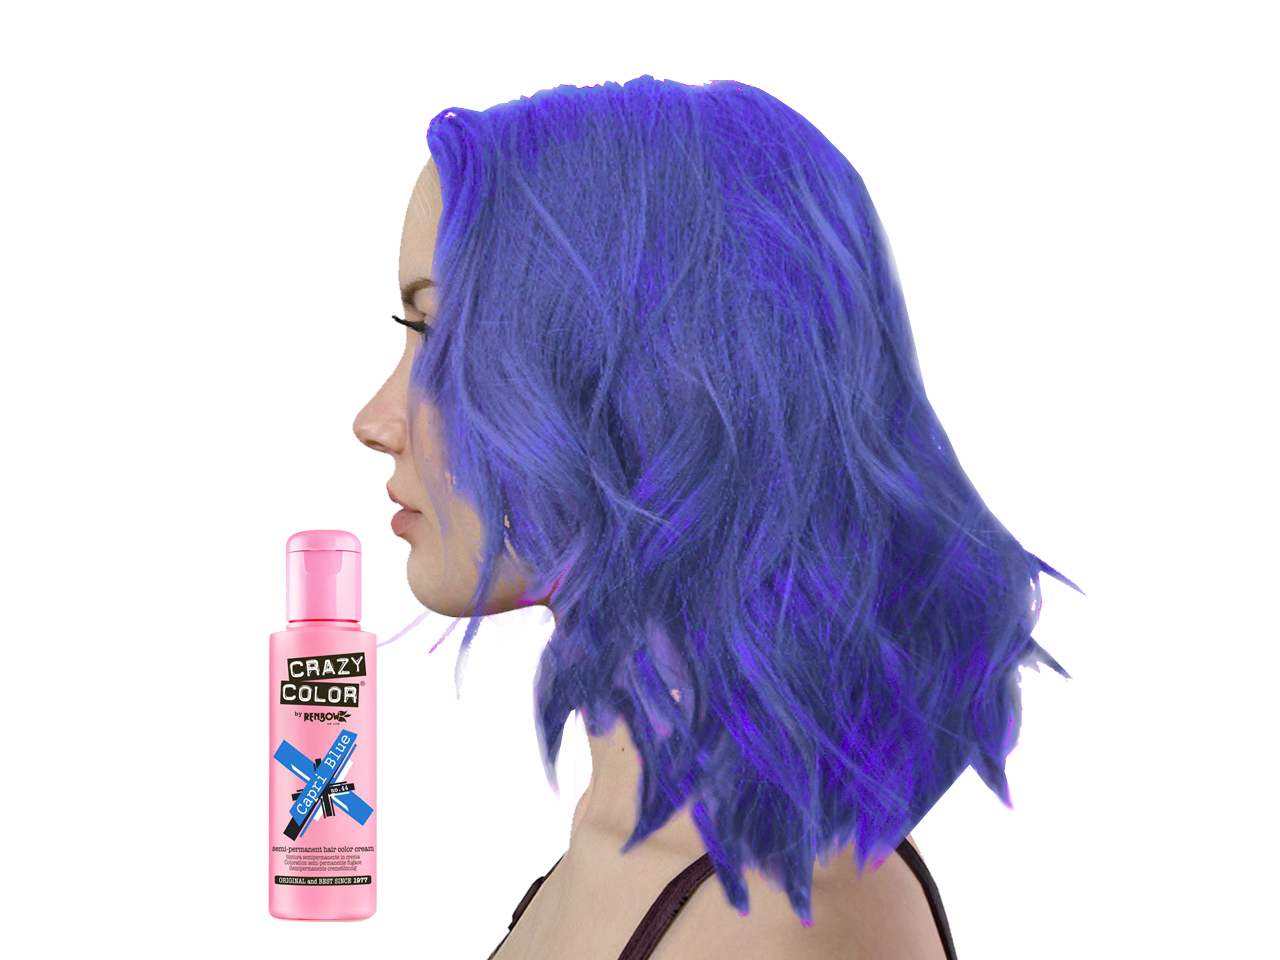 5. Crazy Color Hair Dye in Blue Jade for Intense Color - wide 9